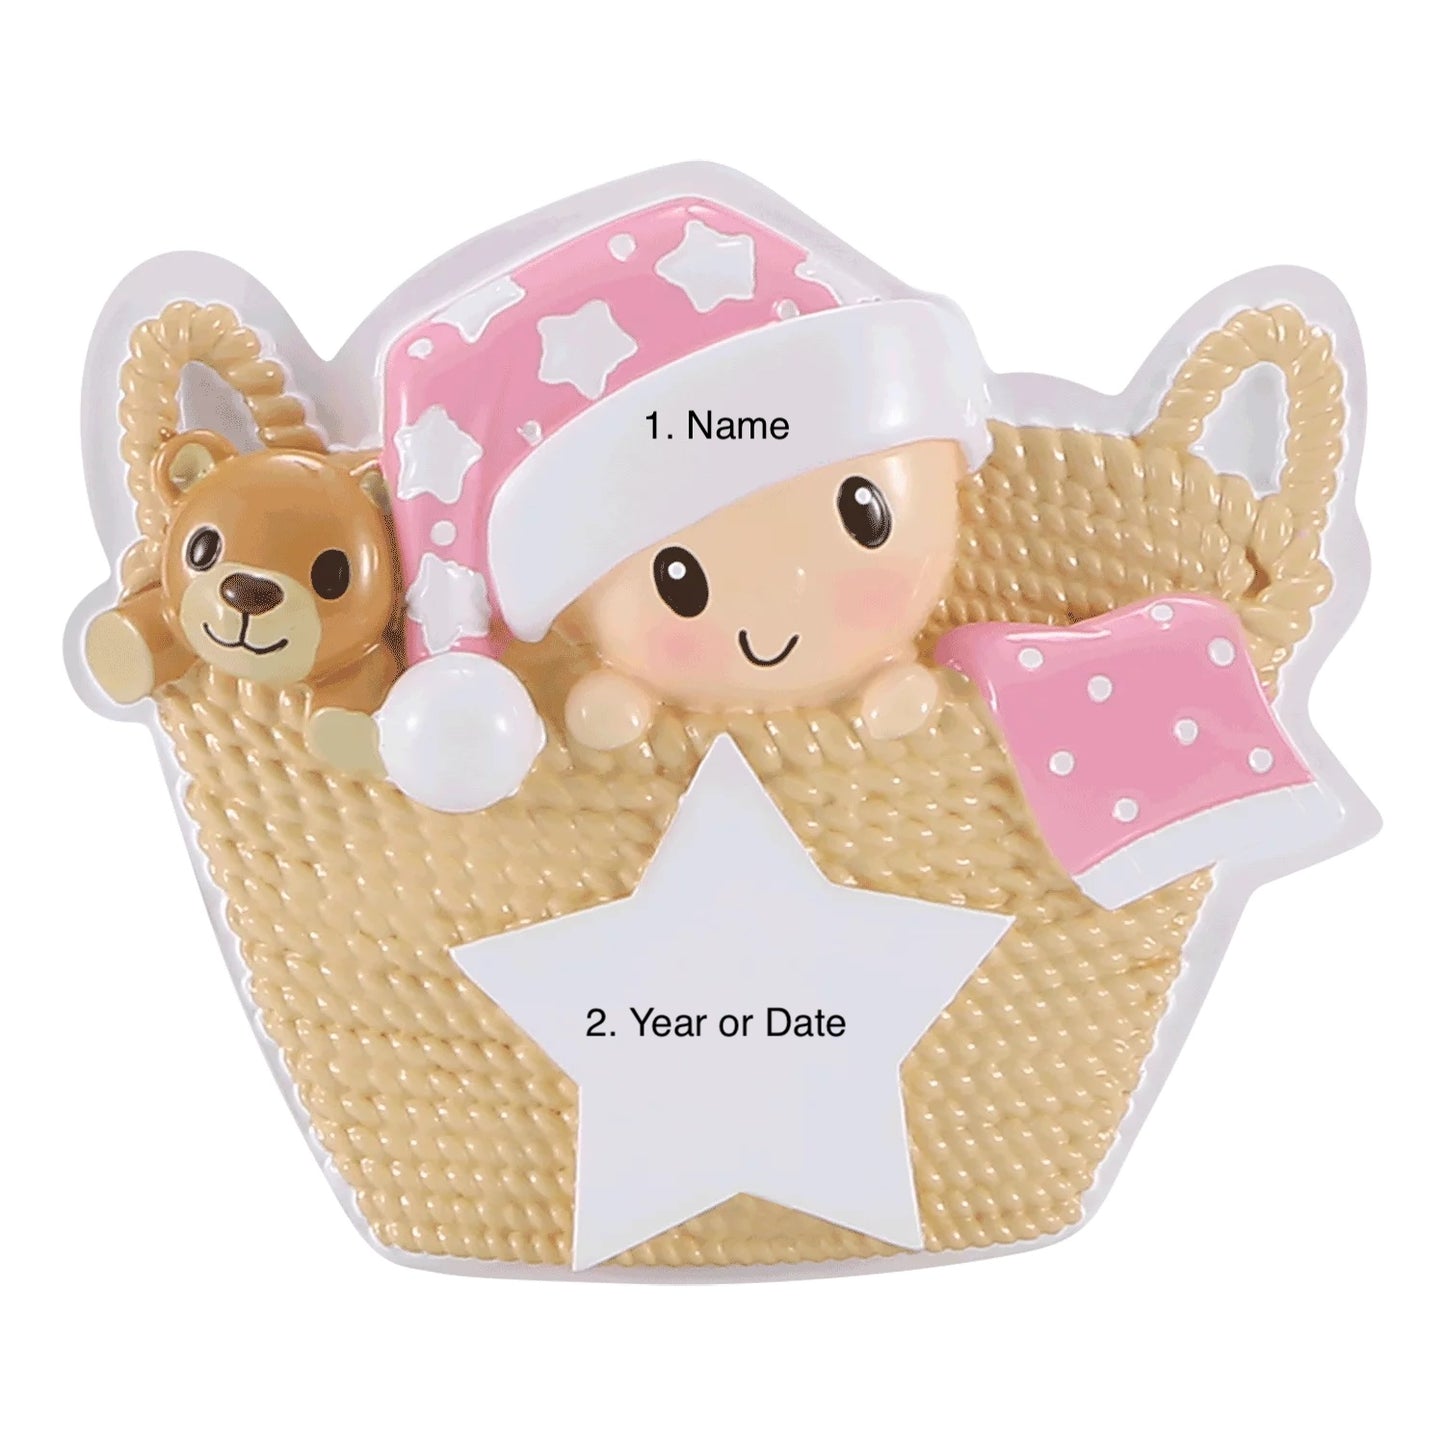 Baby in Basket - Pink Ornament